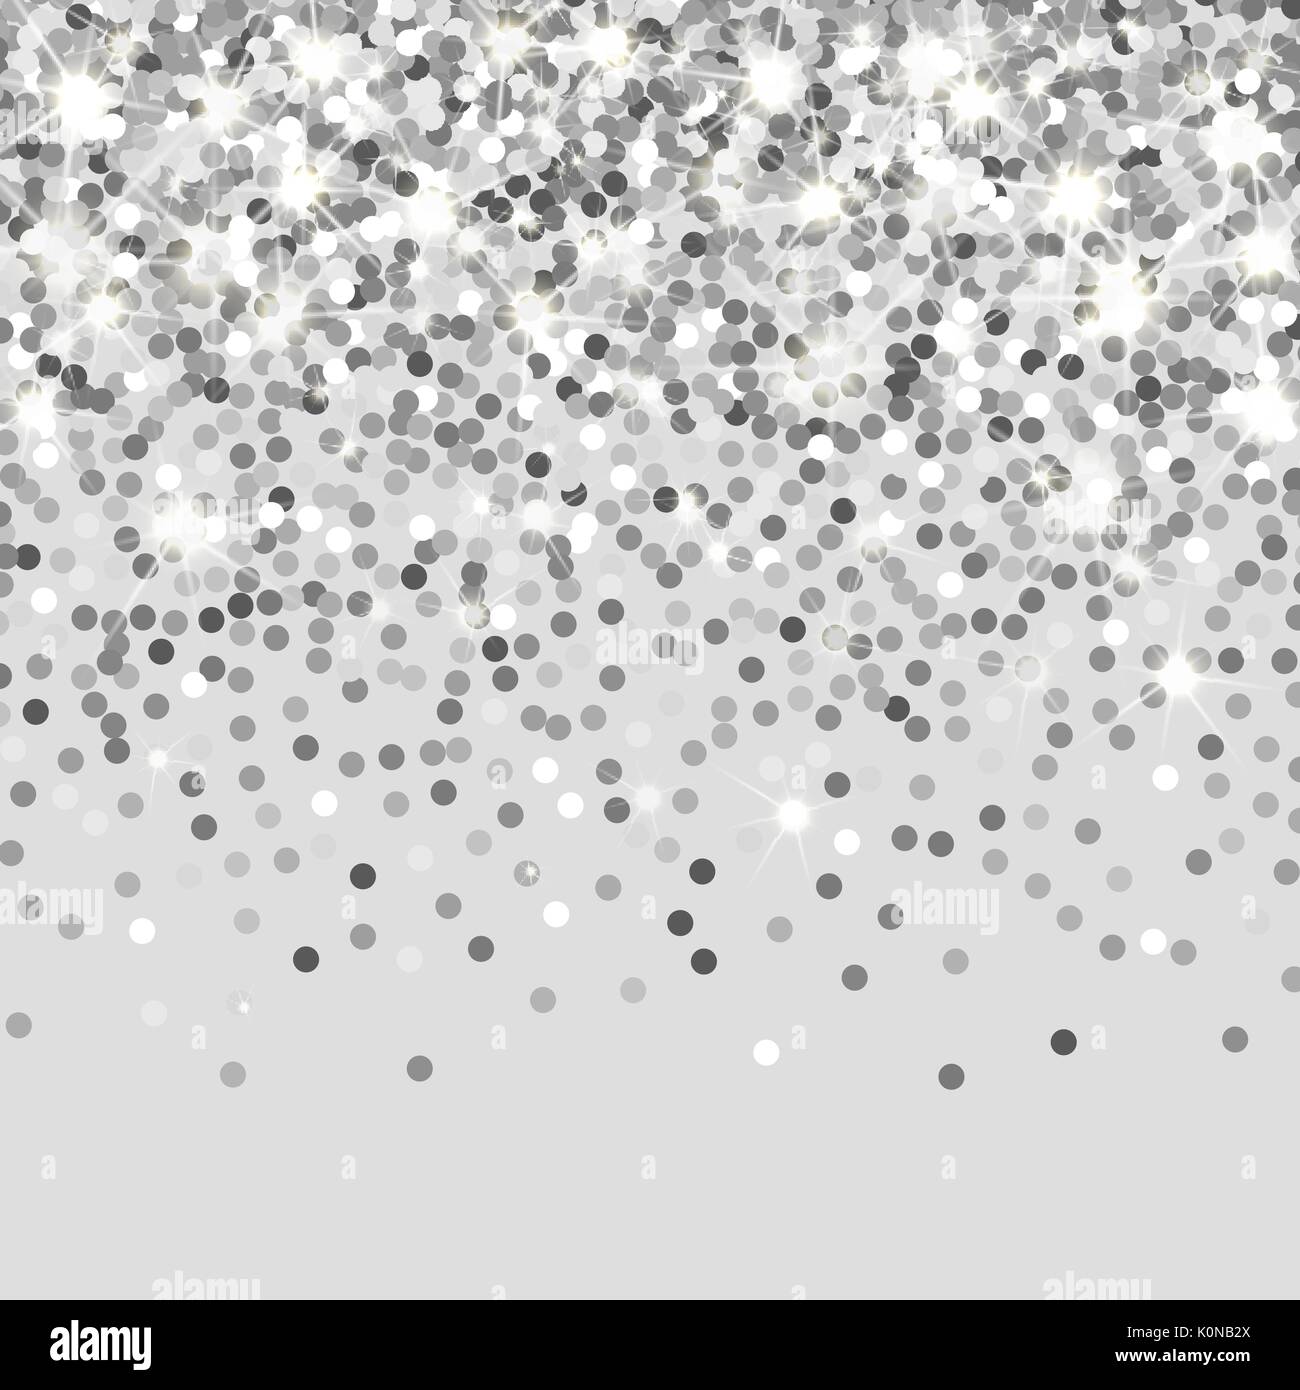 Falling silver particles on a black background. Scattered silver confetti. Rich luxury fashion backdrop. Bright shining glitter. Round dots. Stock Vector